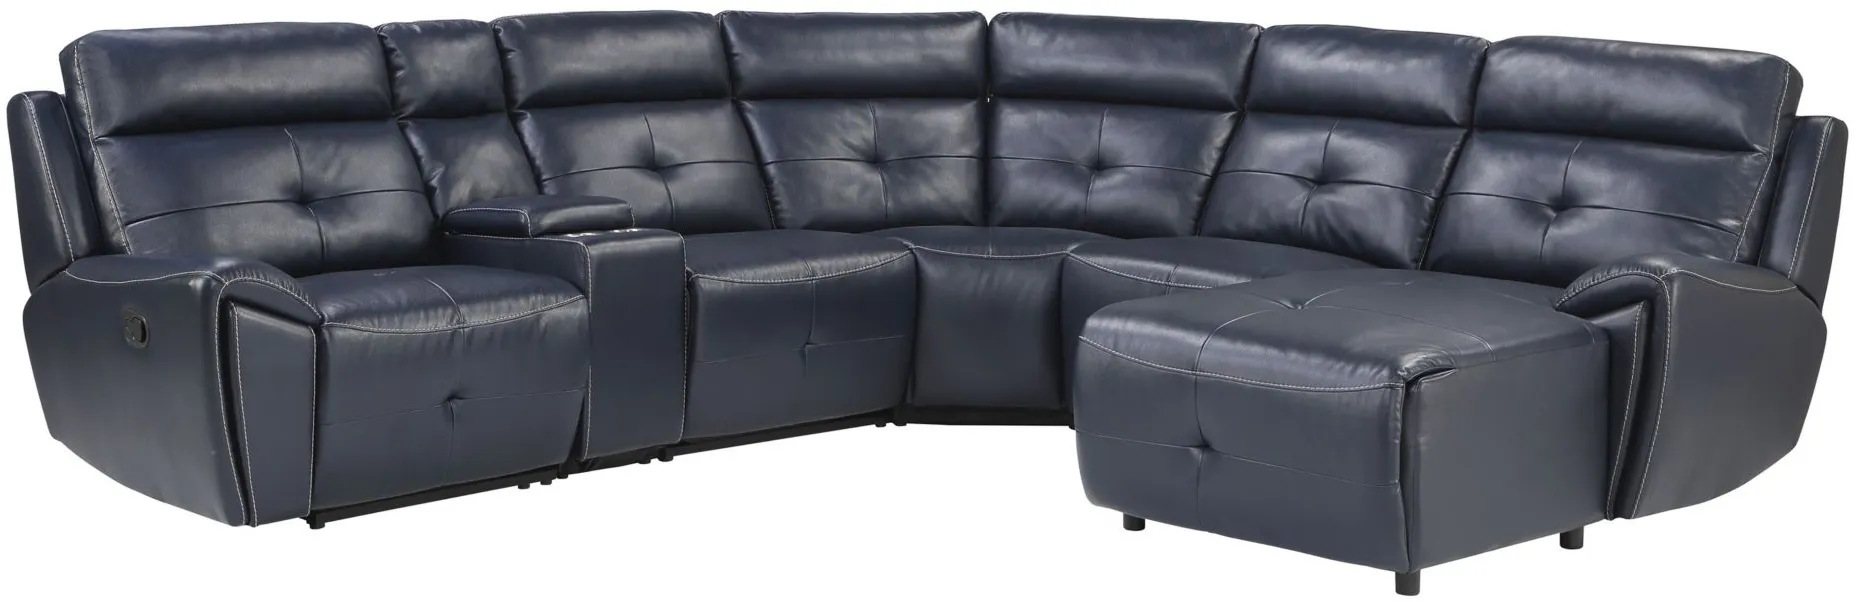 Morelia 6-pc. Modular Reclining Sectional Sofa with Right Arm Facing Chaise in Navy Blue by Homelegance